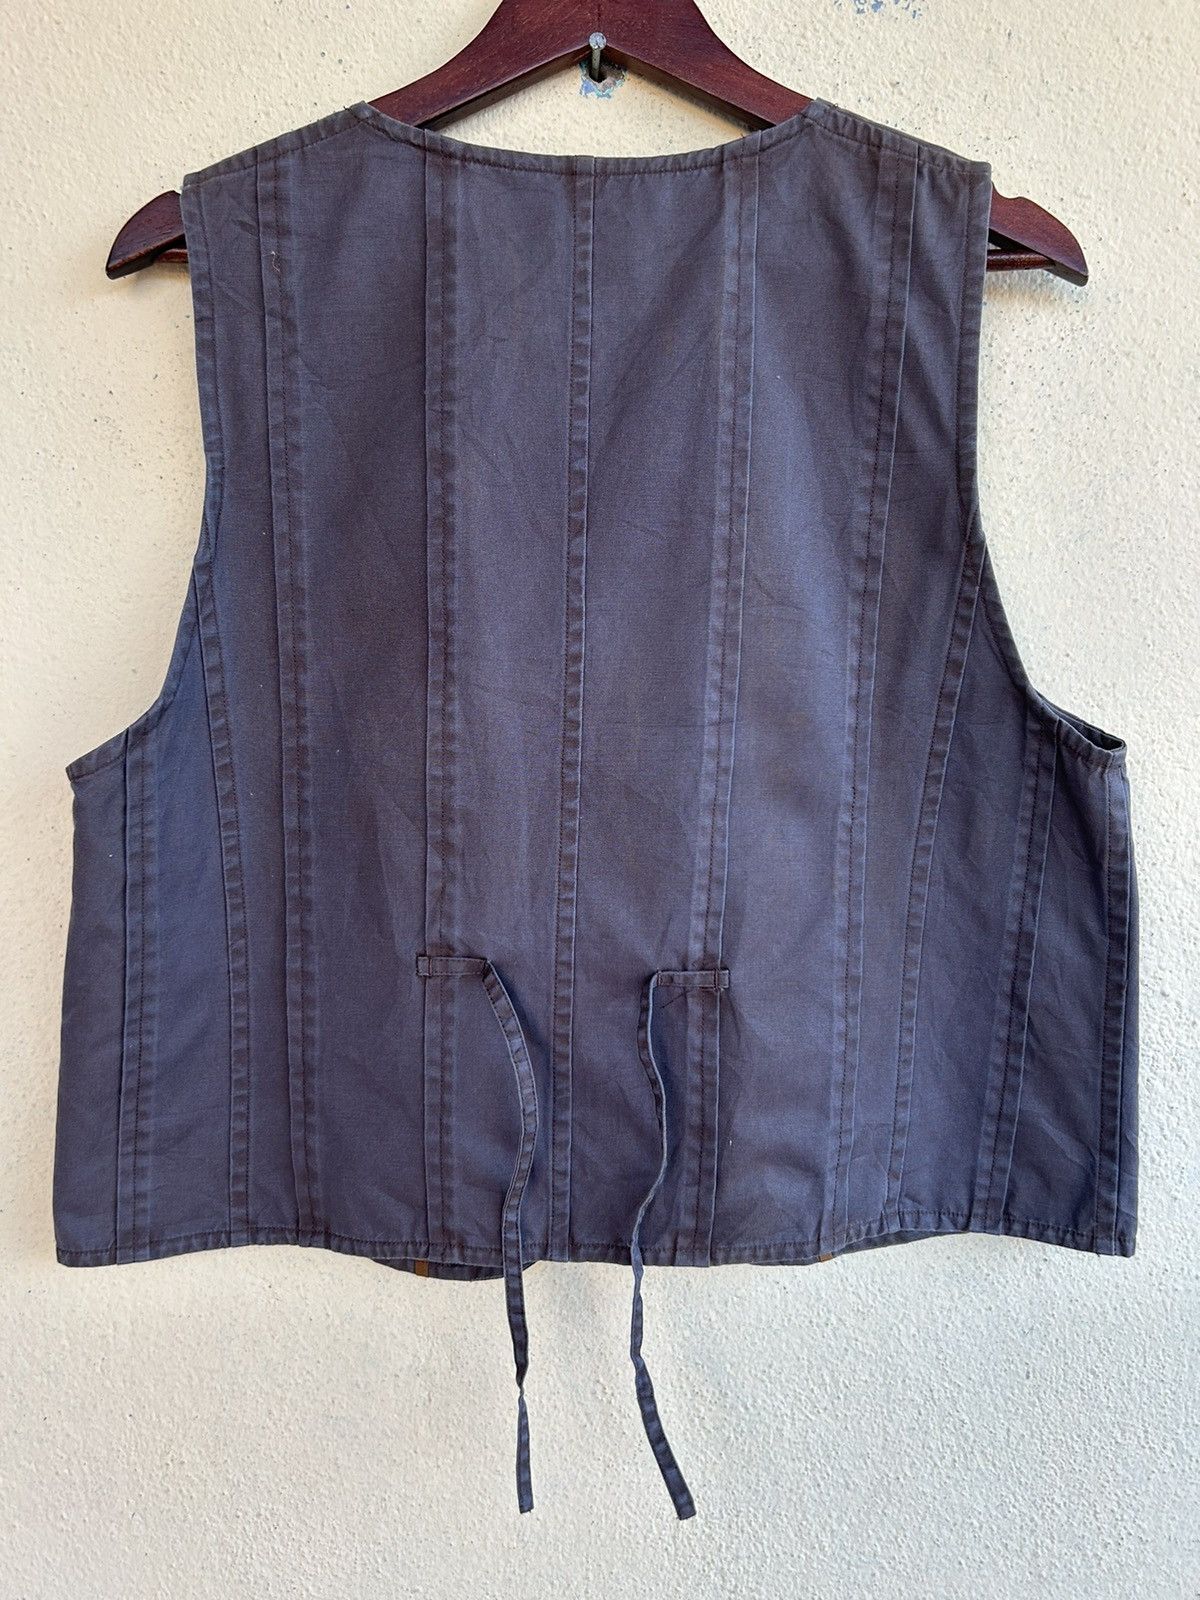 Issey Miyake Sporting Gear Hai Pleated Outdoor Vest | Grailed